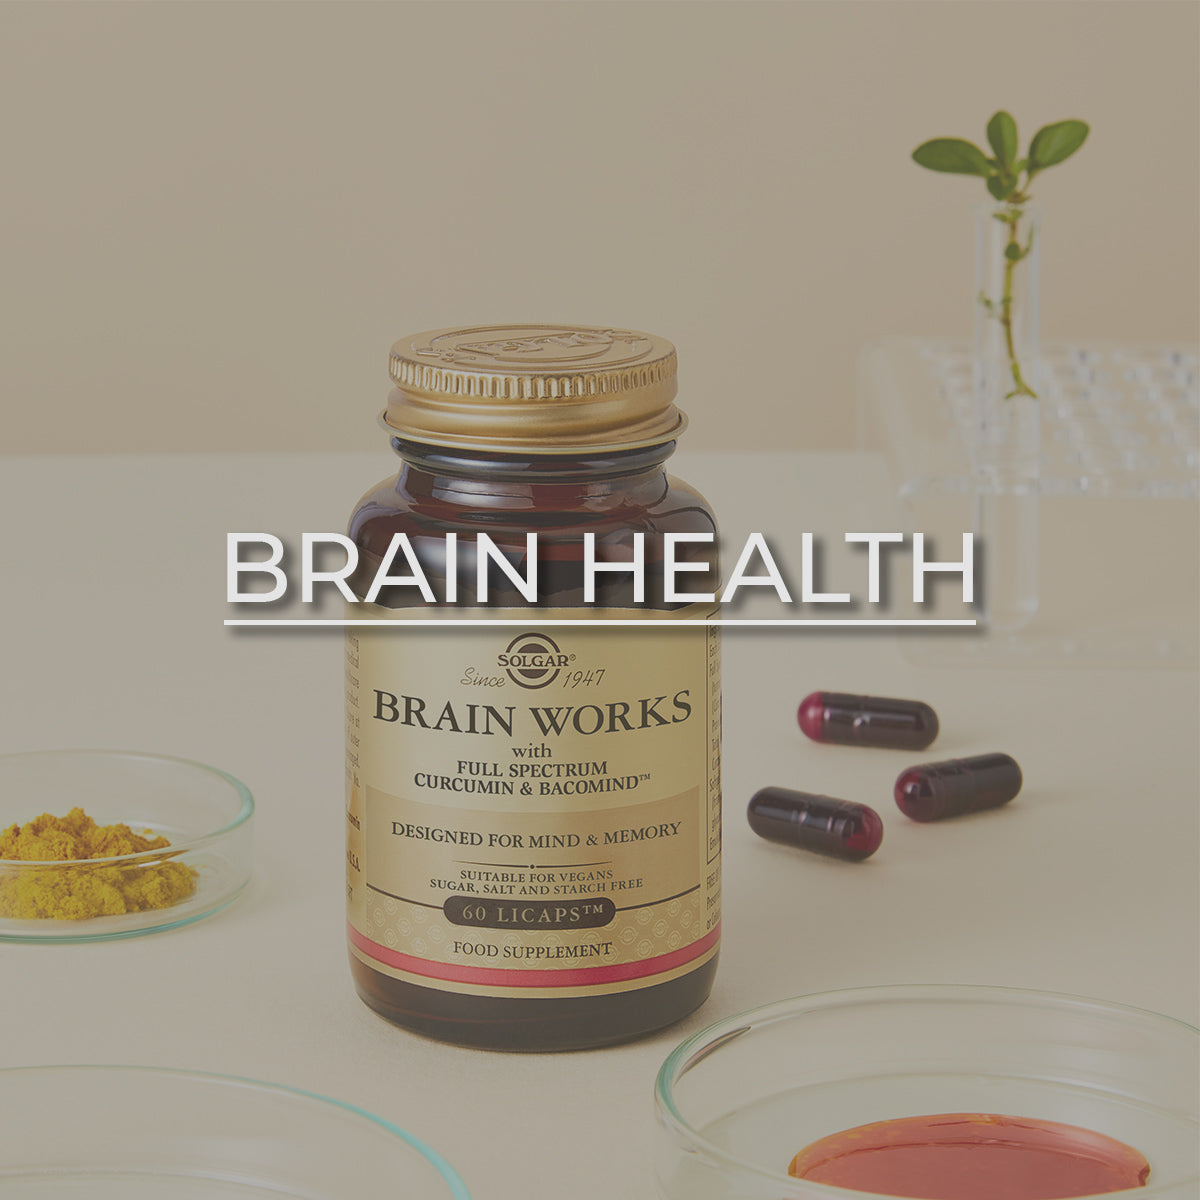 Click here to browse by Brain Health category